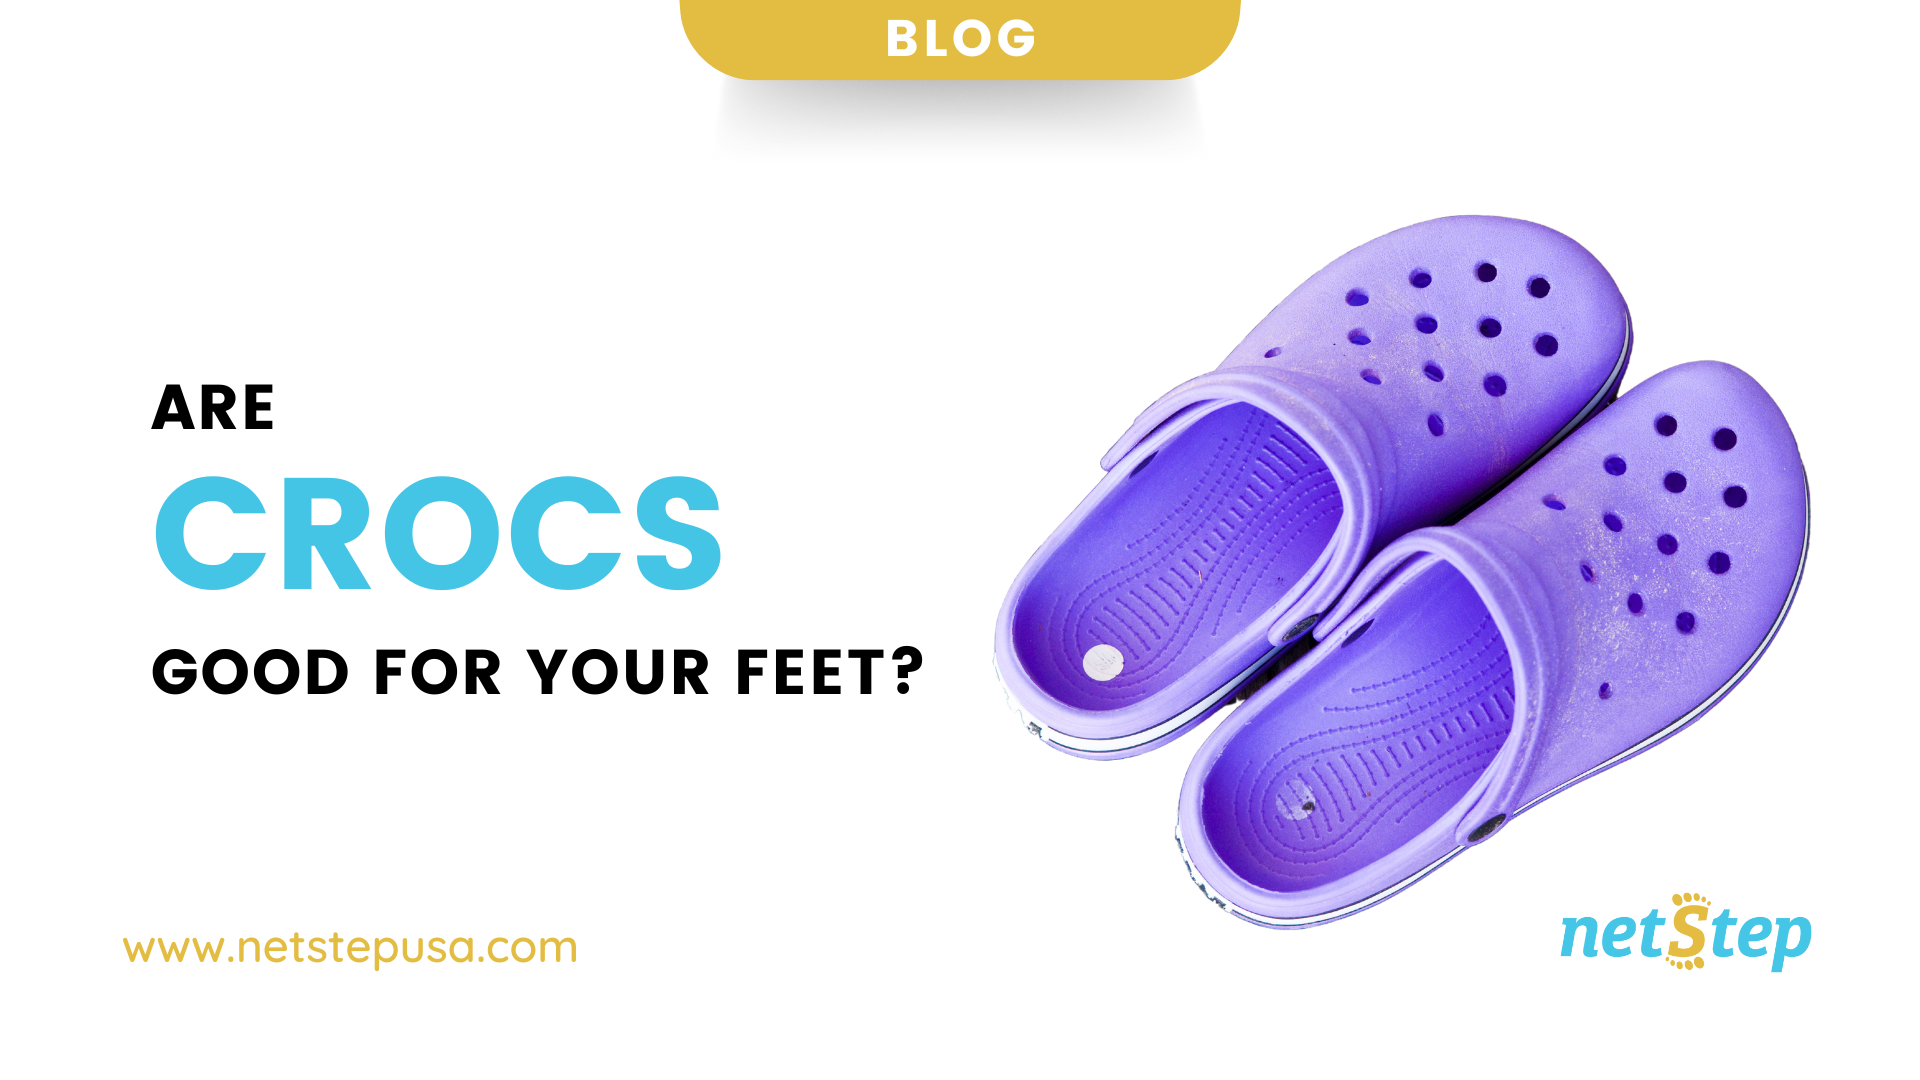 Are Crocs Good for Your Feet? - netStep